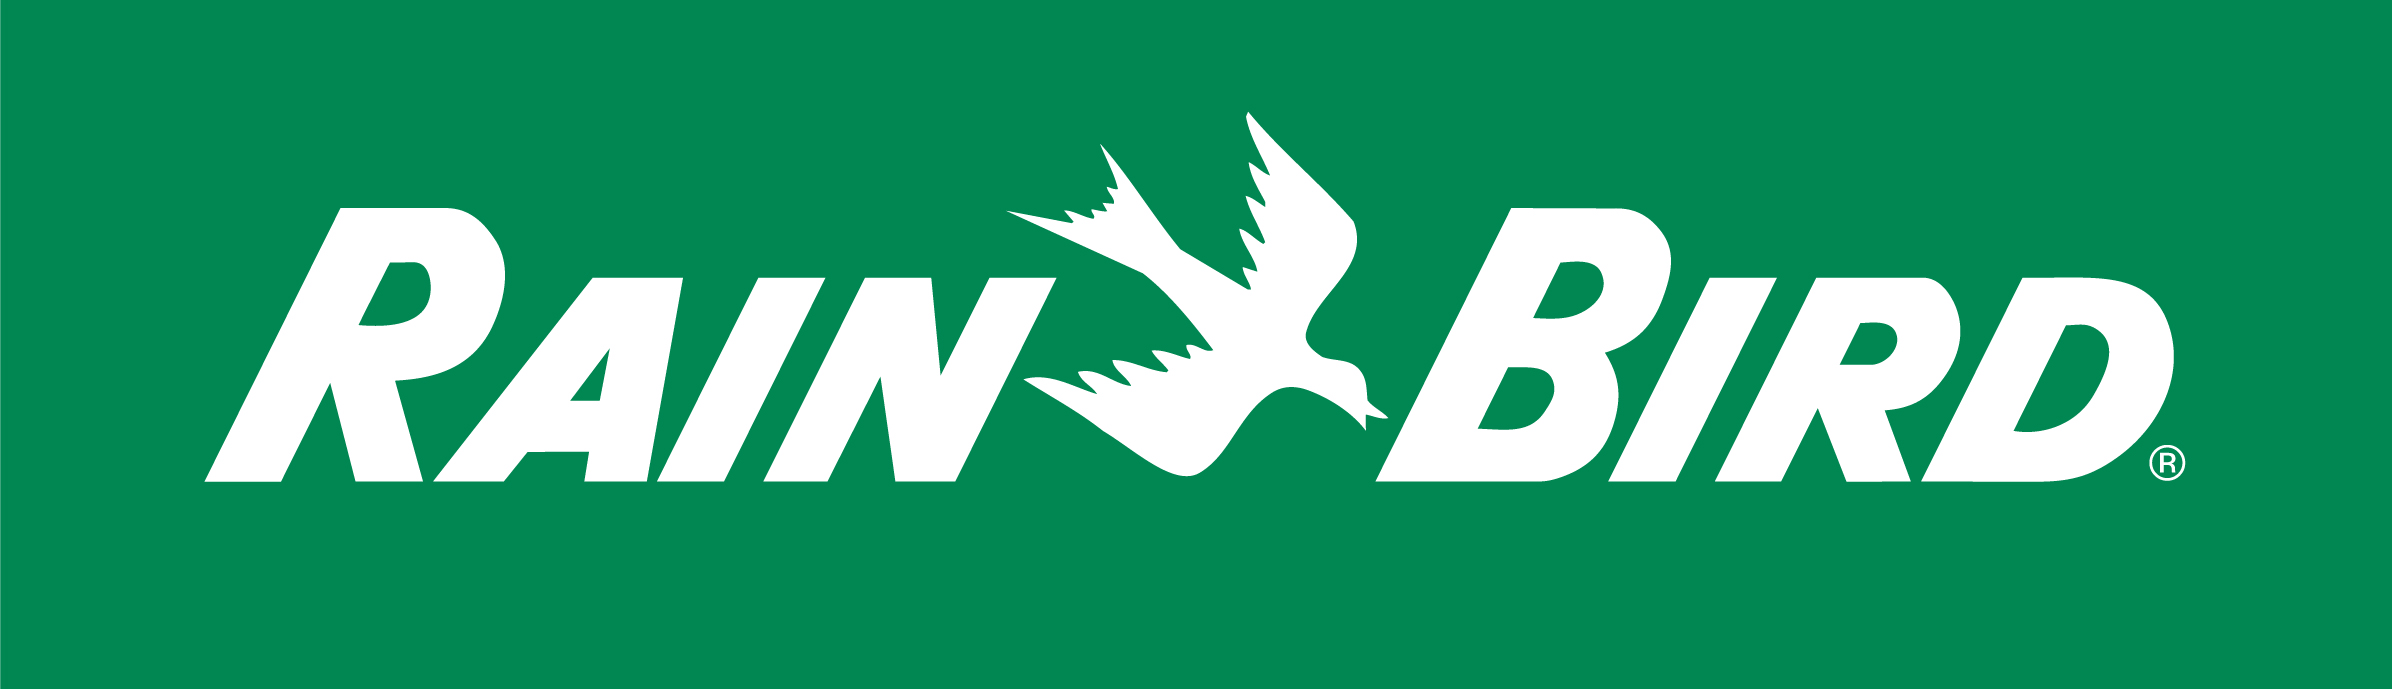 A green and white logo with a bird flying.